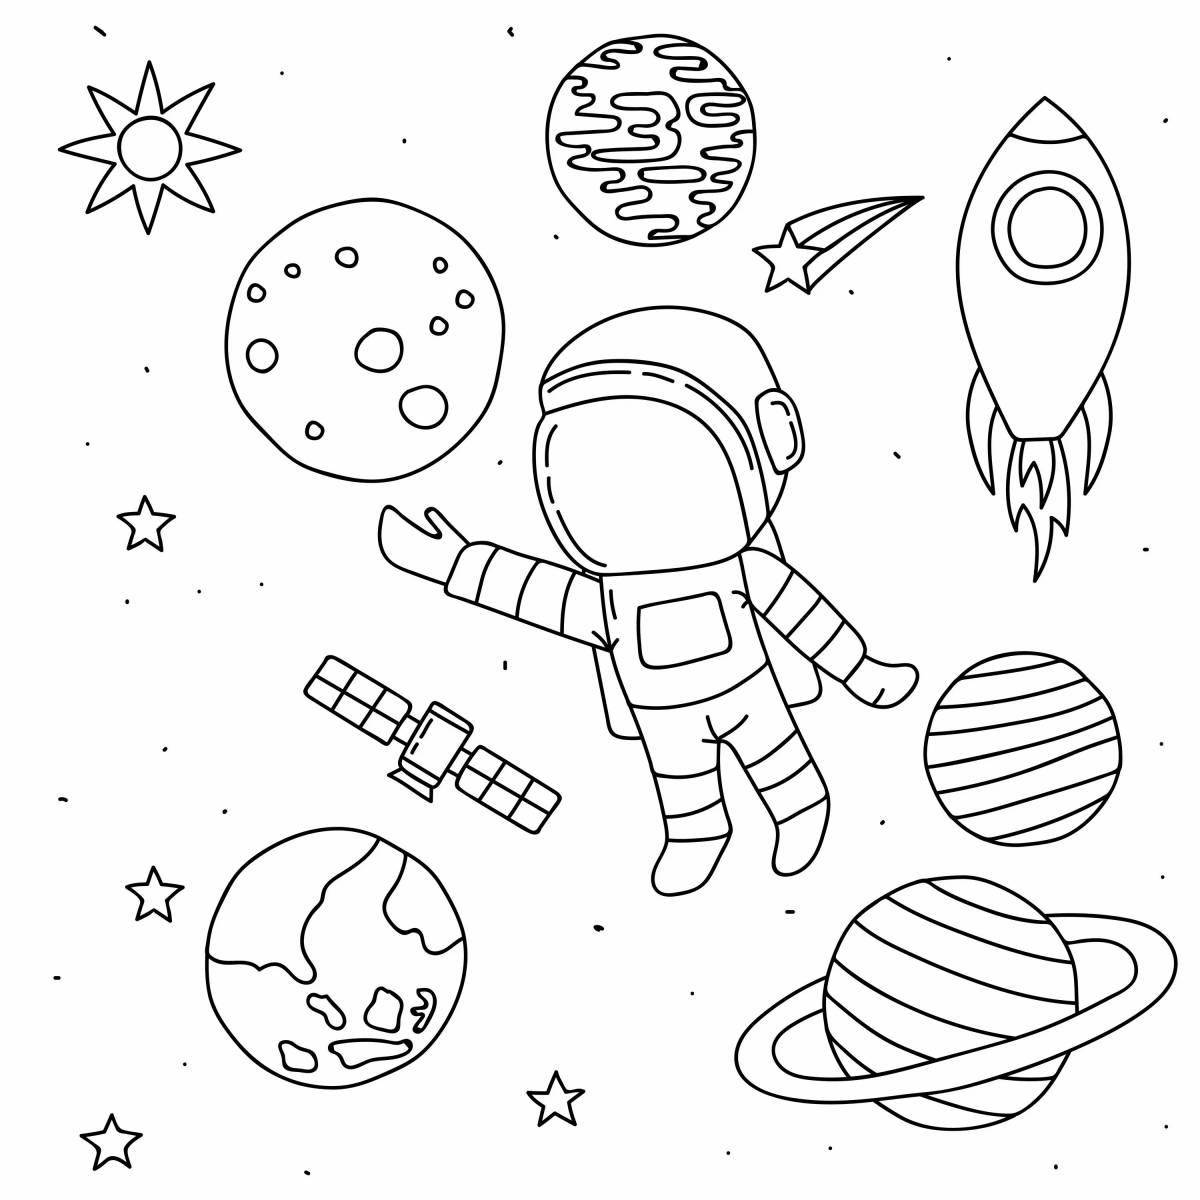 1st class shiny space coloring book